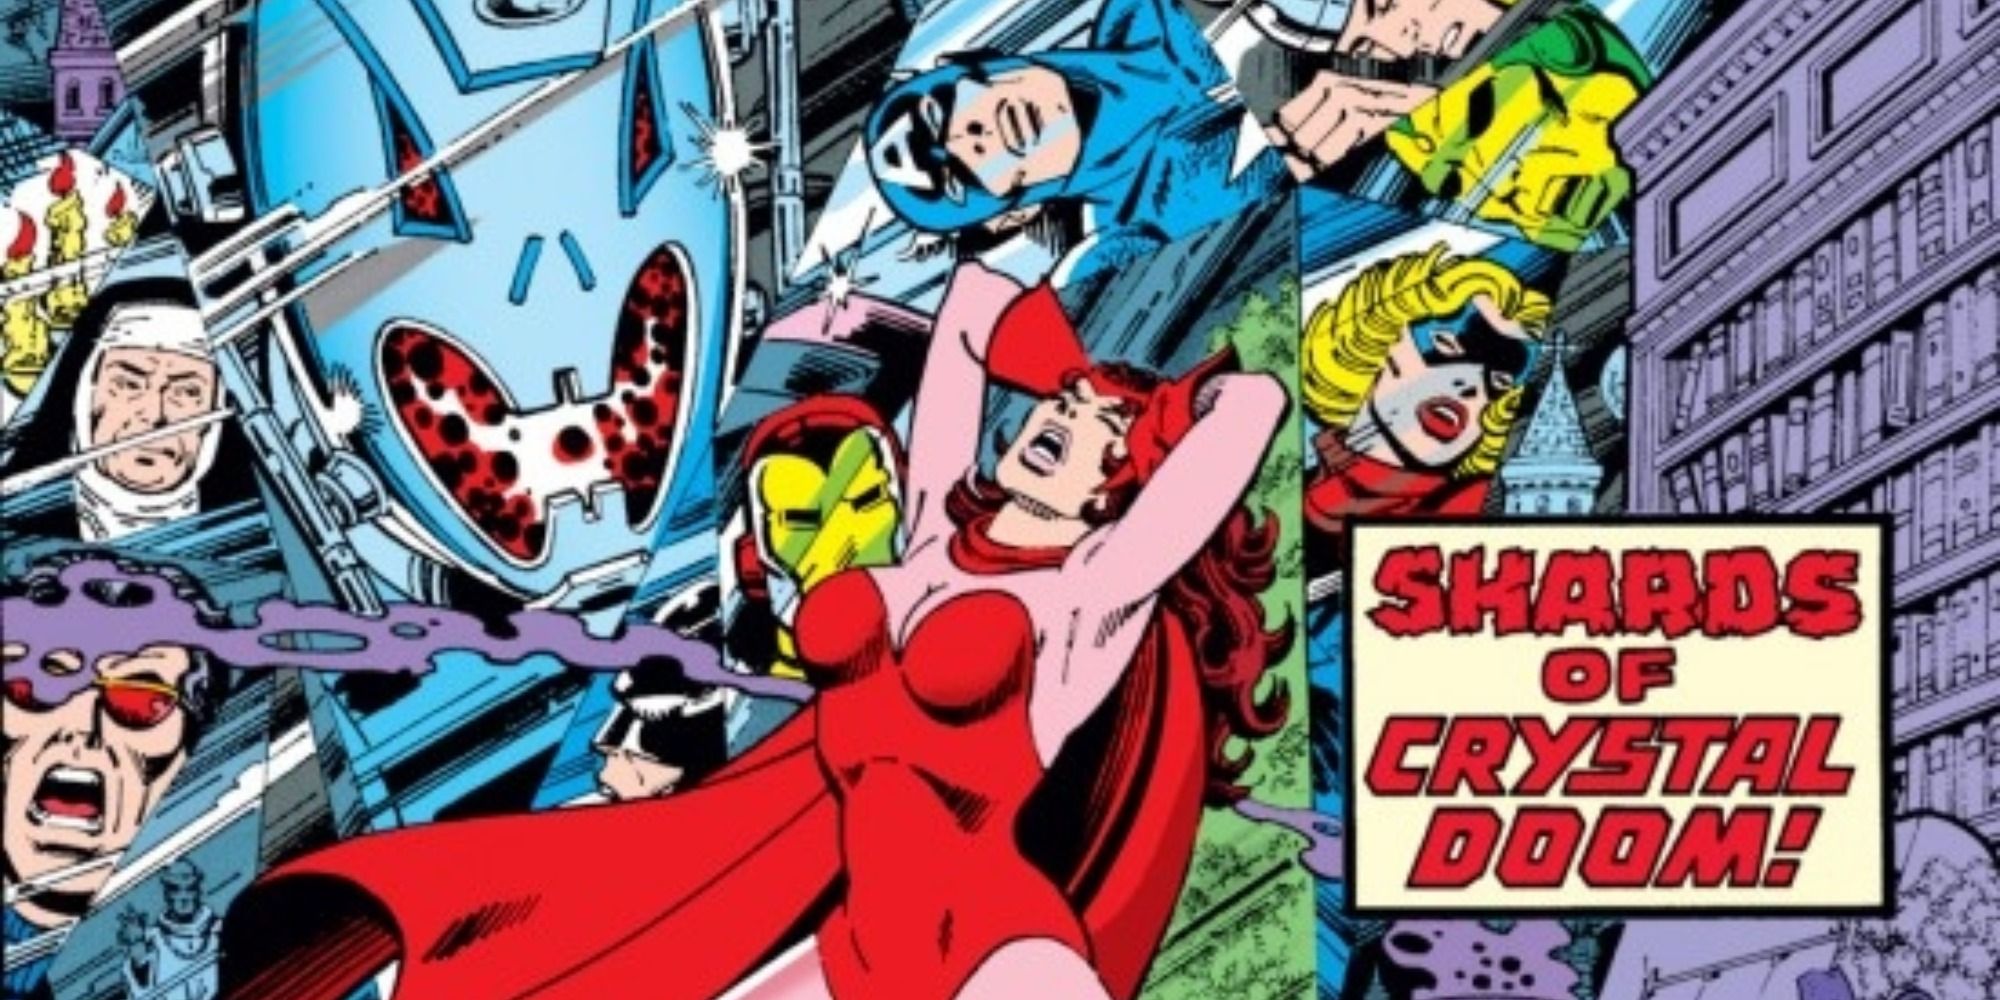 Ultron fights the Scarlet Witch in Marvel Comics.